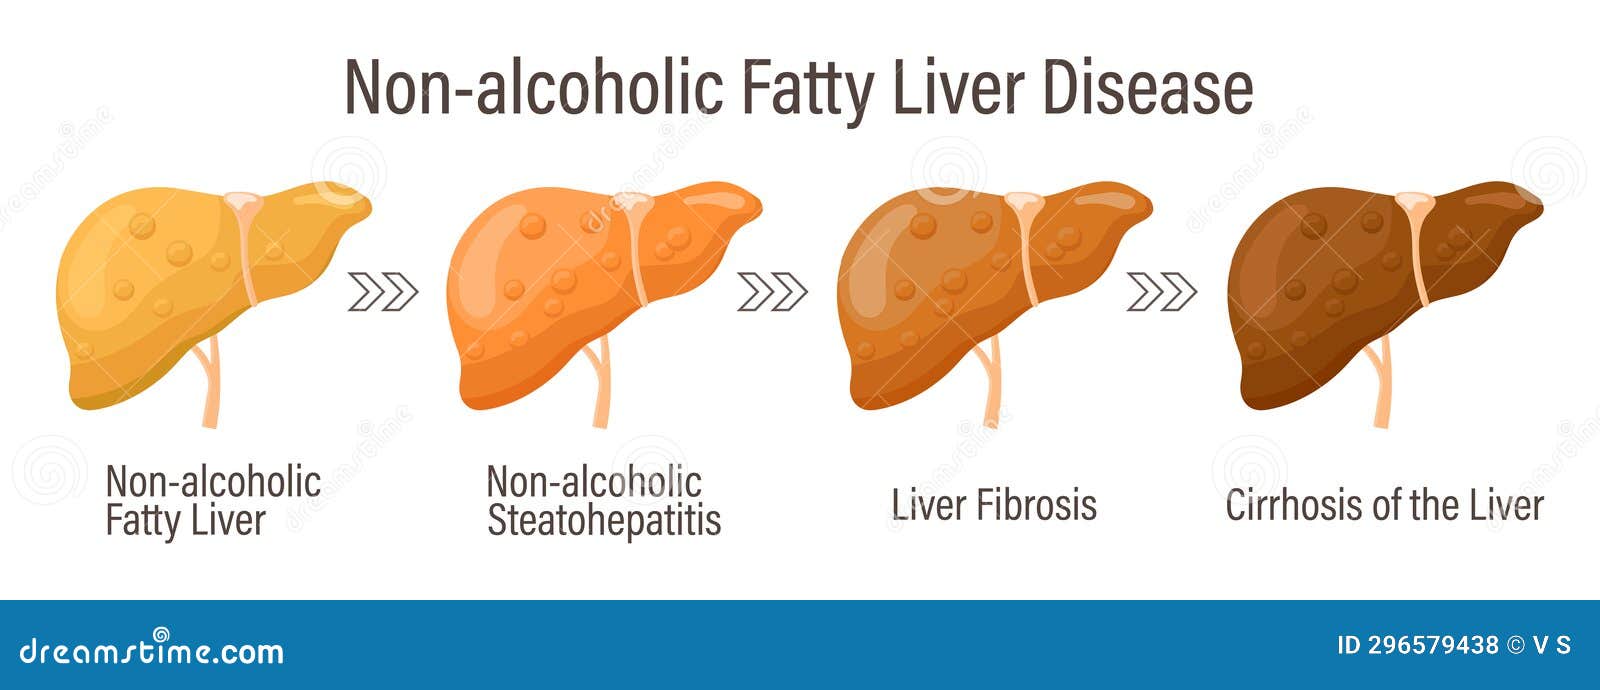 Types of Fatty Liver. Human Liver Diseases. Non-alcoholic Fatty Liver ...